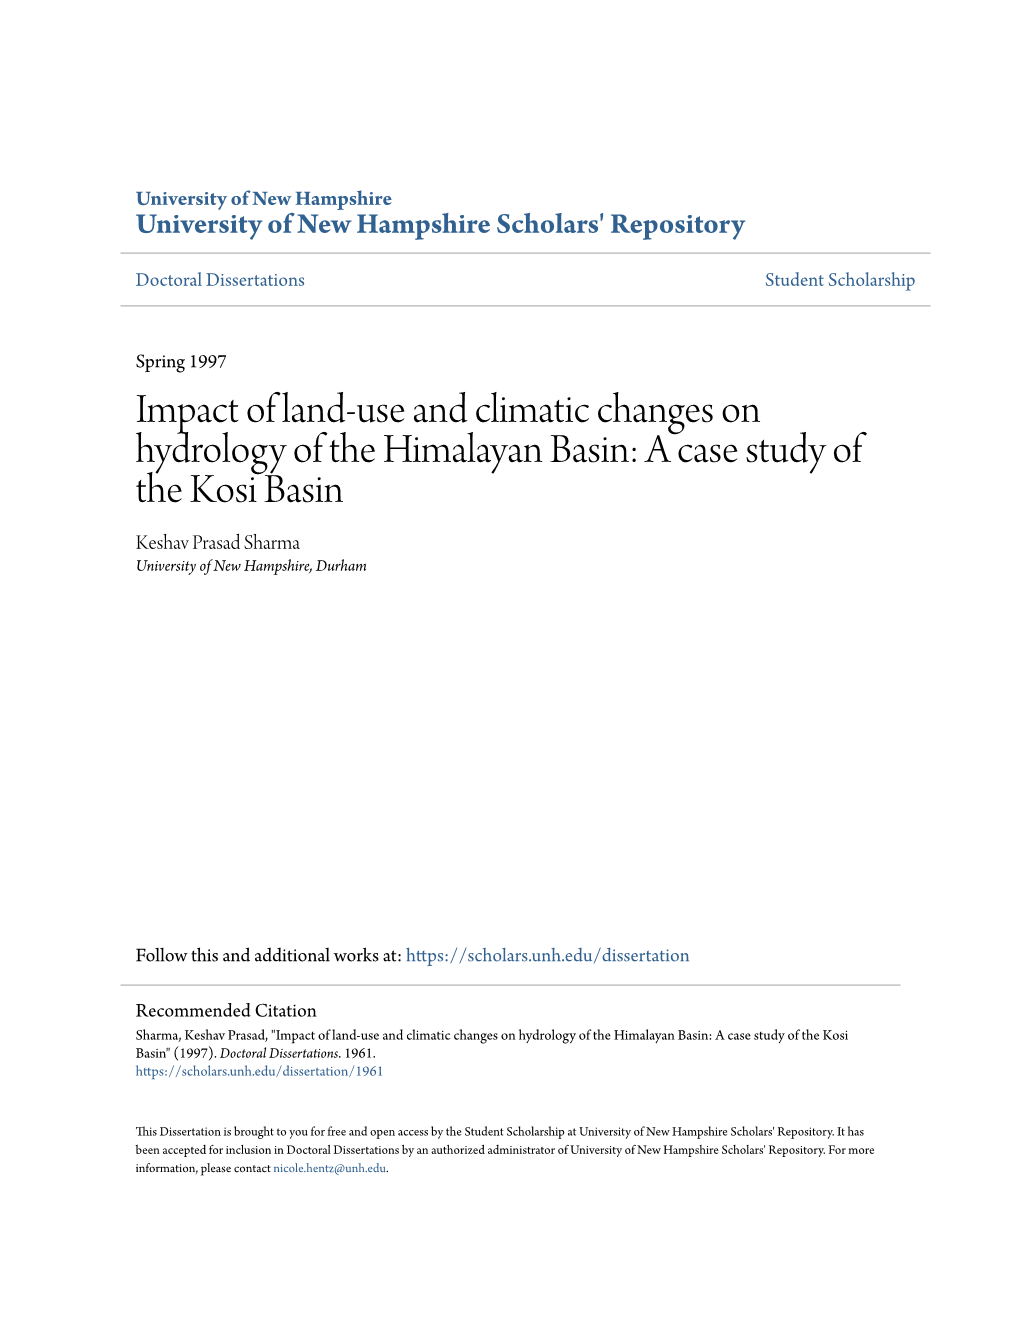 Impact of Land-Use and Climatic Changes on Hydrology of the Himalayan Basin: a Case Study of the Kosi Basin Keshav Prasad Sharma University of New Hampshire, Durham